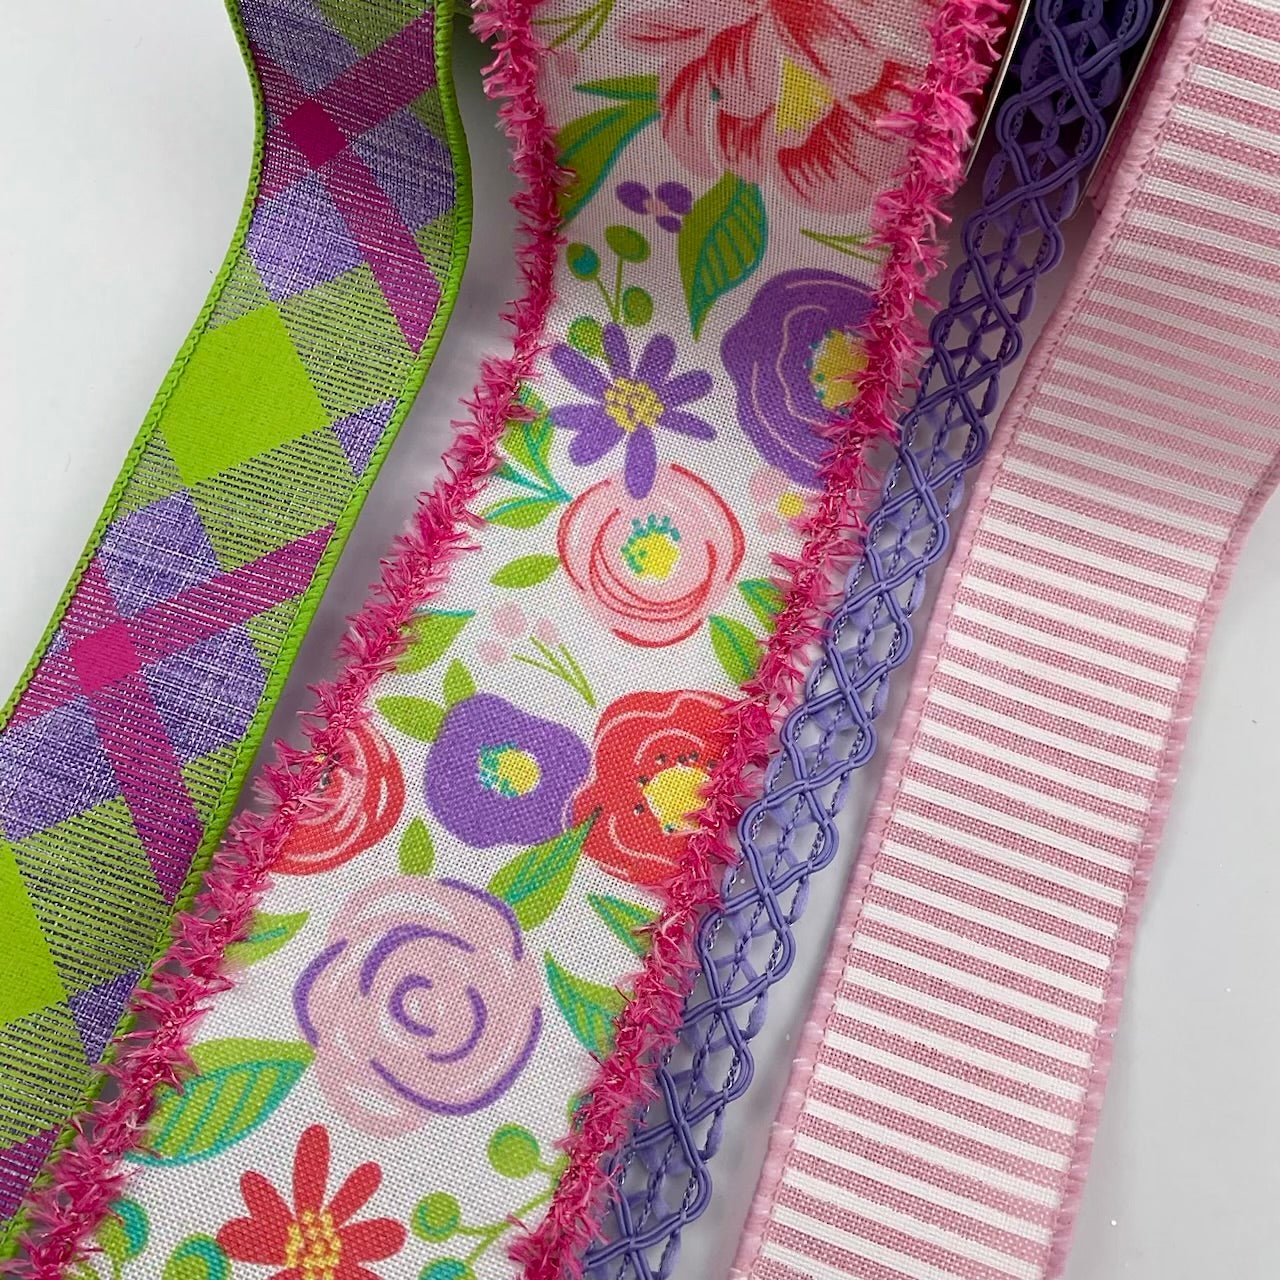 Multi Floral, purple, bow bundle x 4 wired ribbons - Greenery MarketWired ribbonBloomfluffedgex4